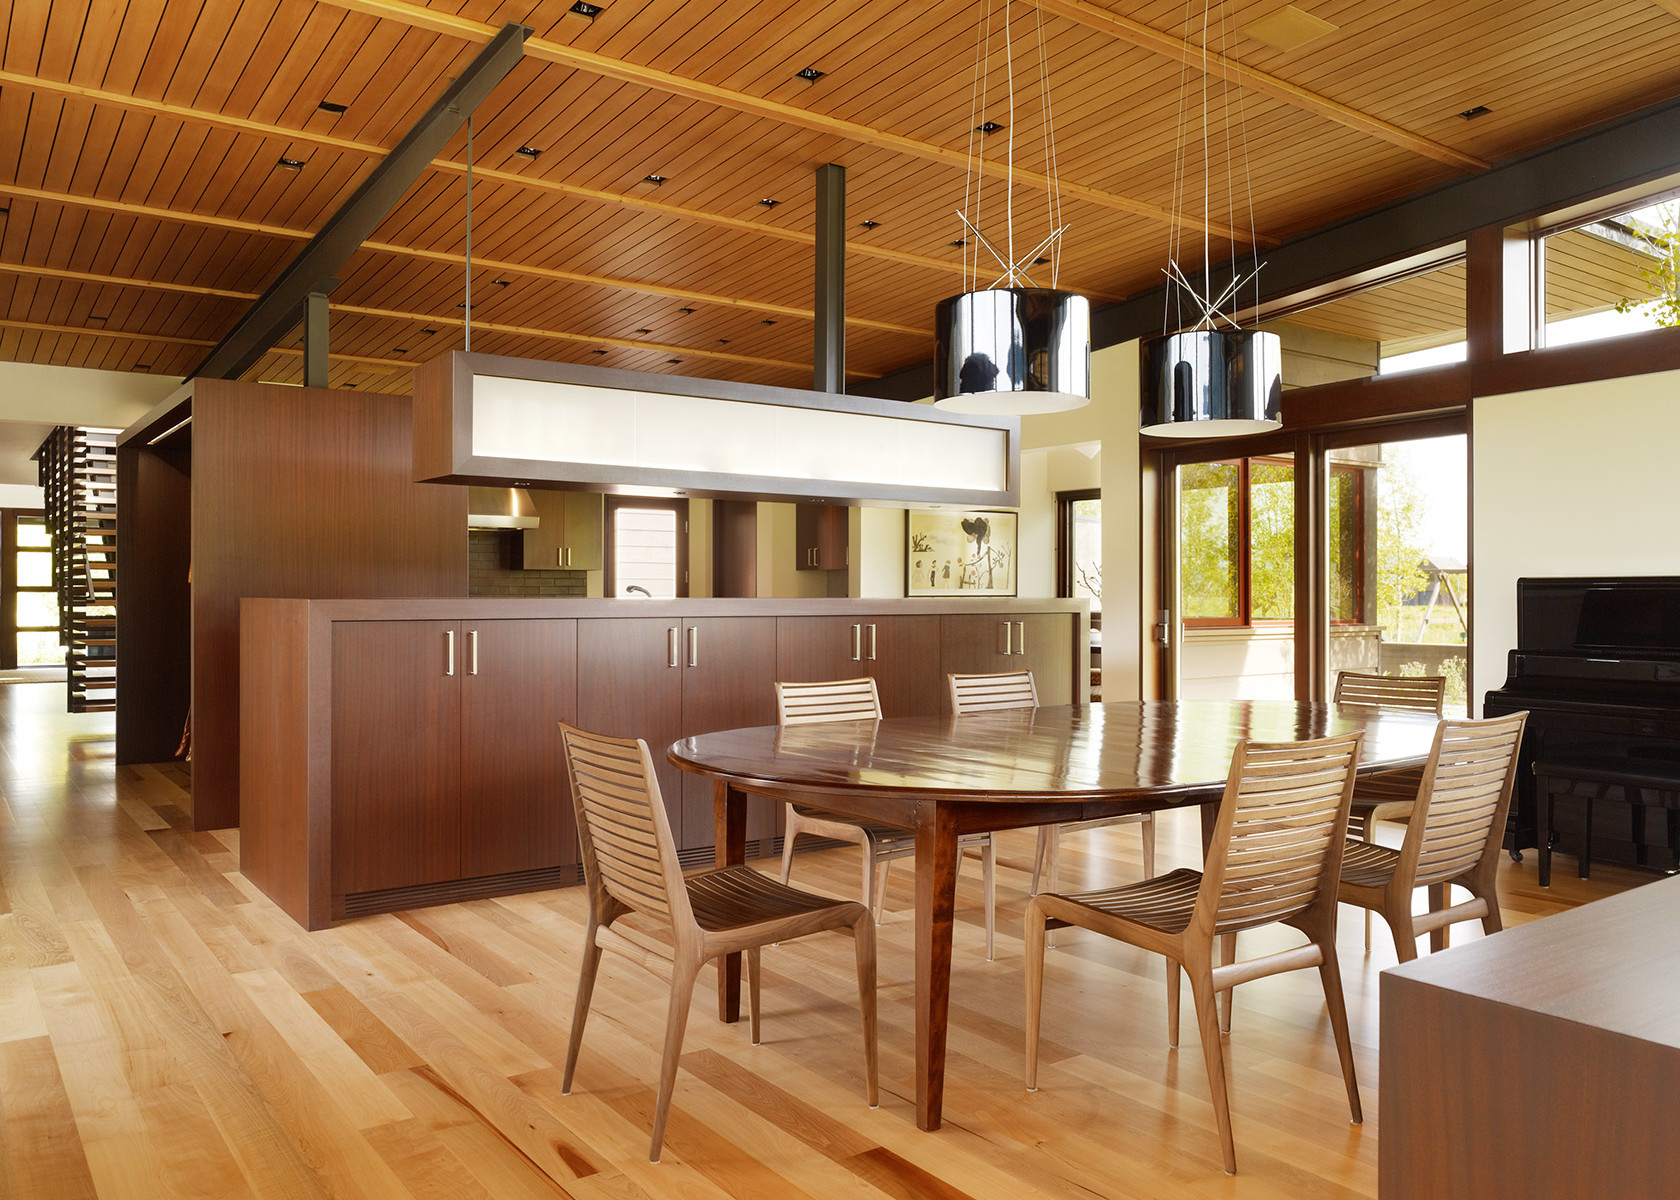 Wooden Ceiling Design For Dining Room